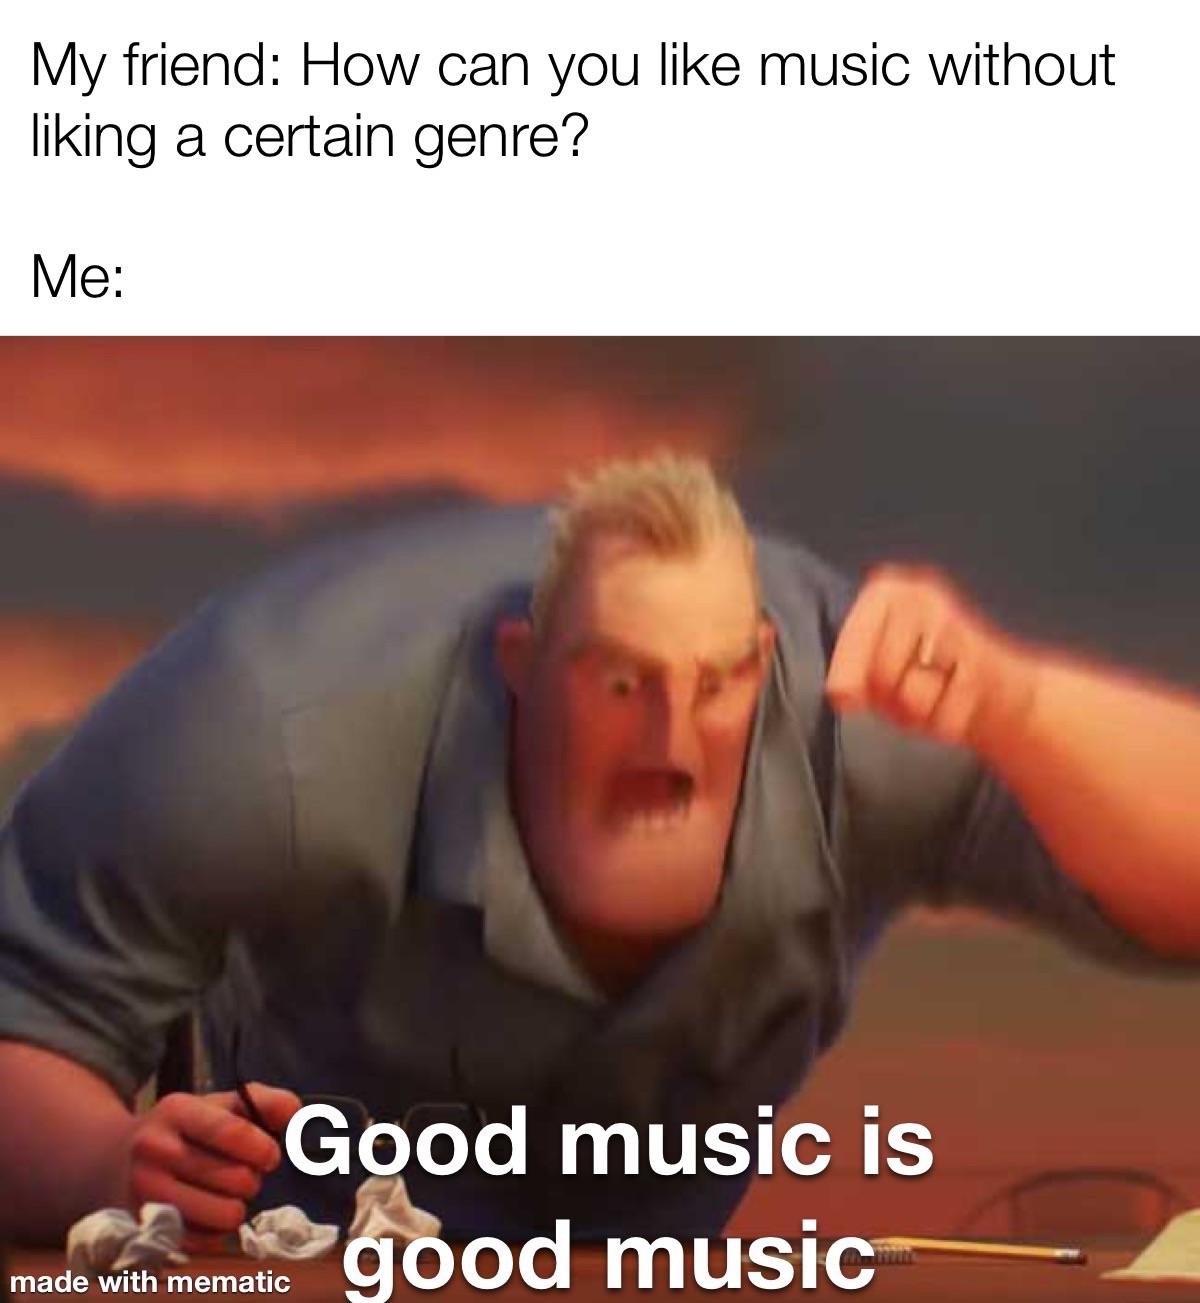 Funny, Spotify, Sabaton, Metallica, Japanese, Mozart other memes Funny, Spotify, Sabaton, Metallica, Japanese, Mozart text: My friend: How can you like music without liking a certain genre? Good music is made with mematic 